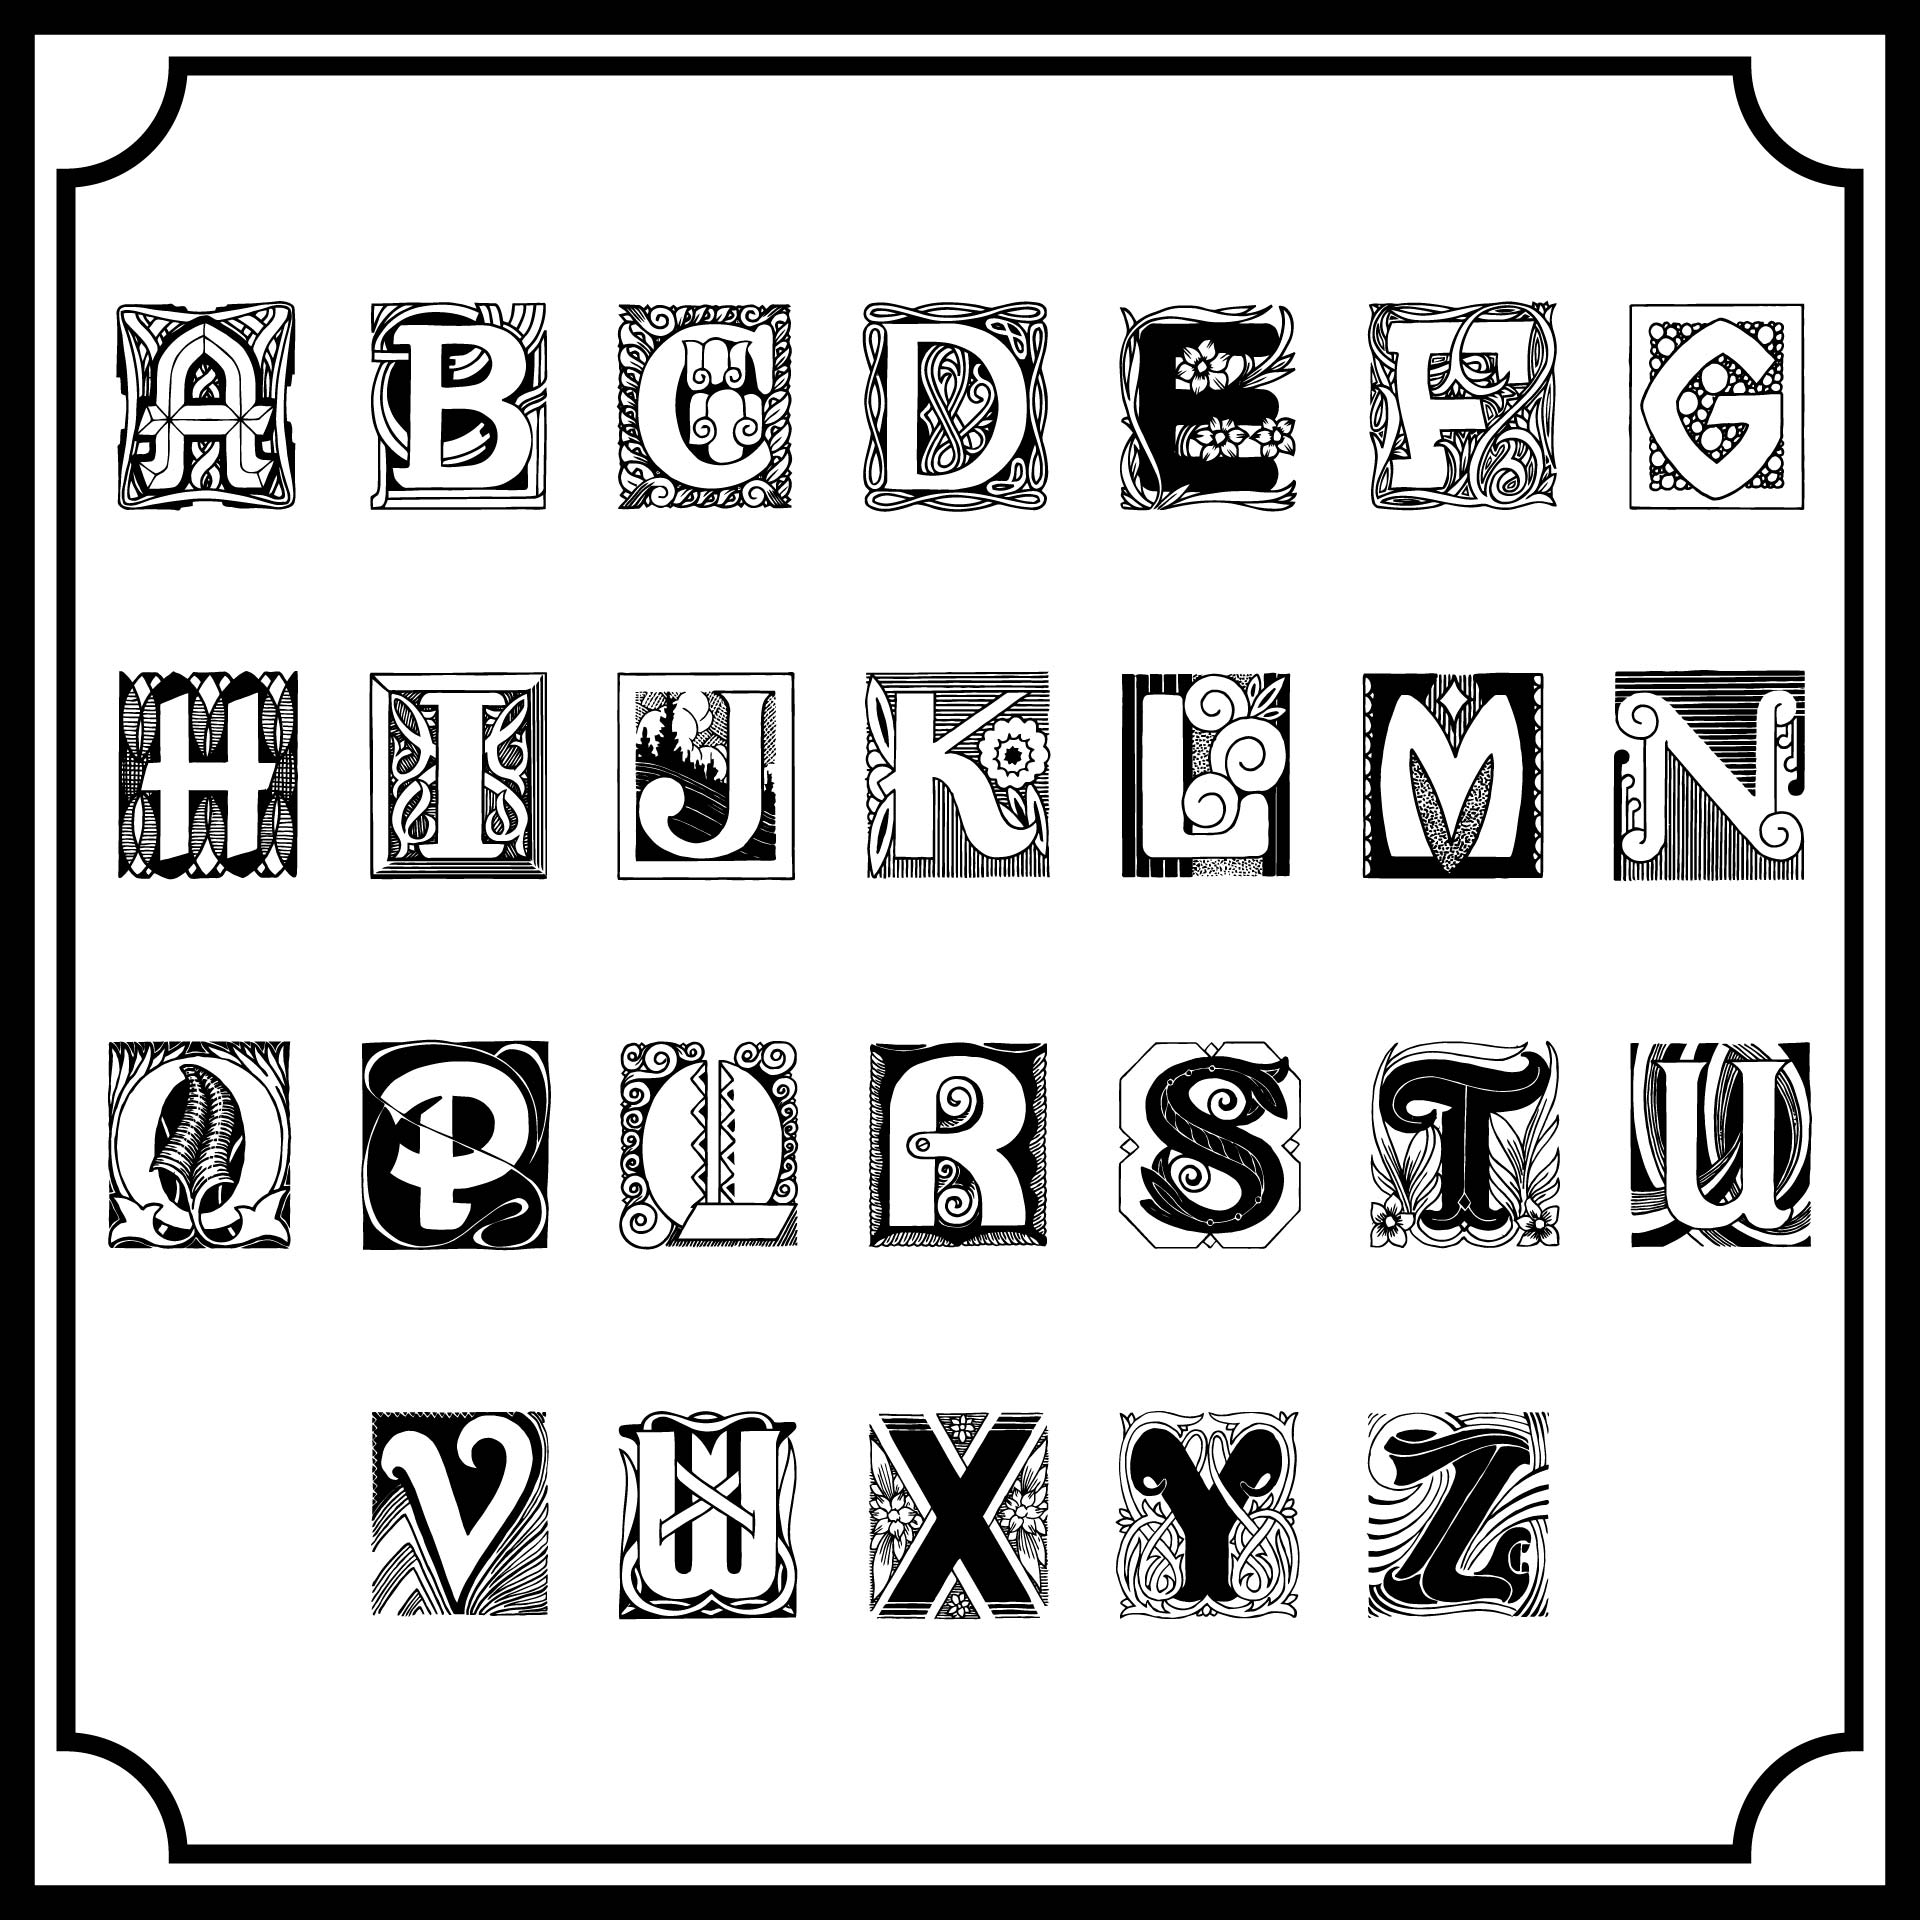 View Letters Monograms For Embroidery The Art Of Mike Mignola